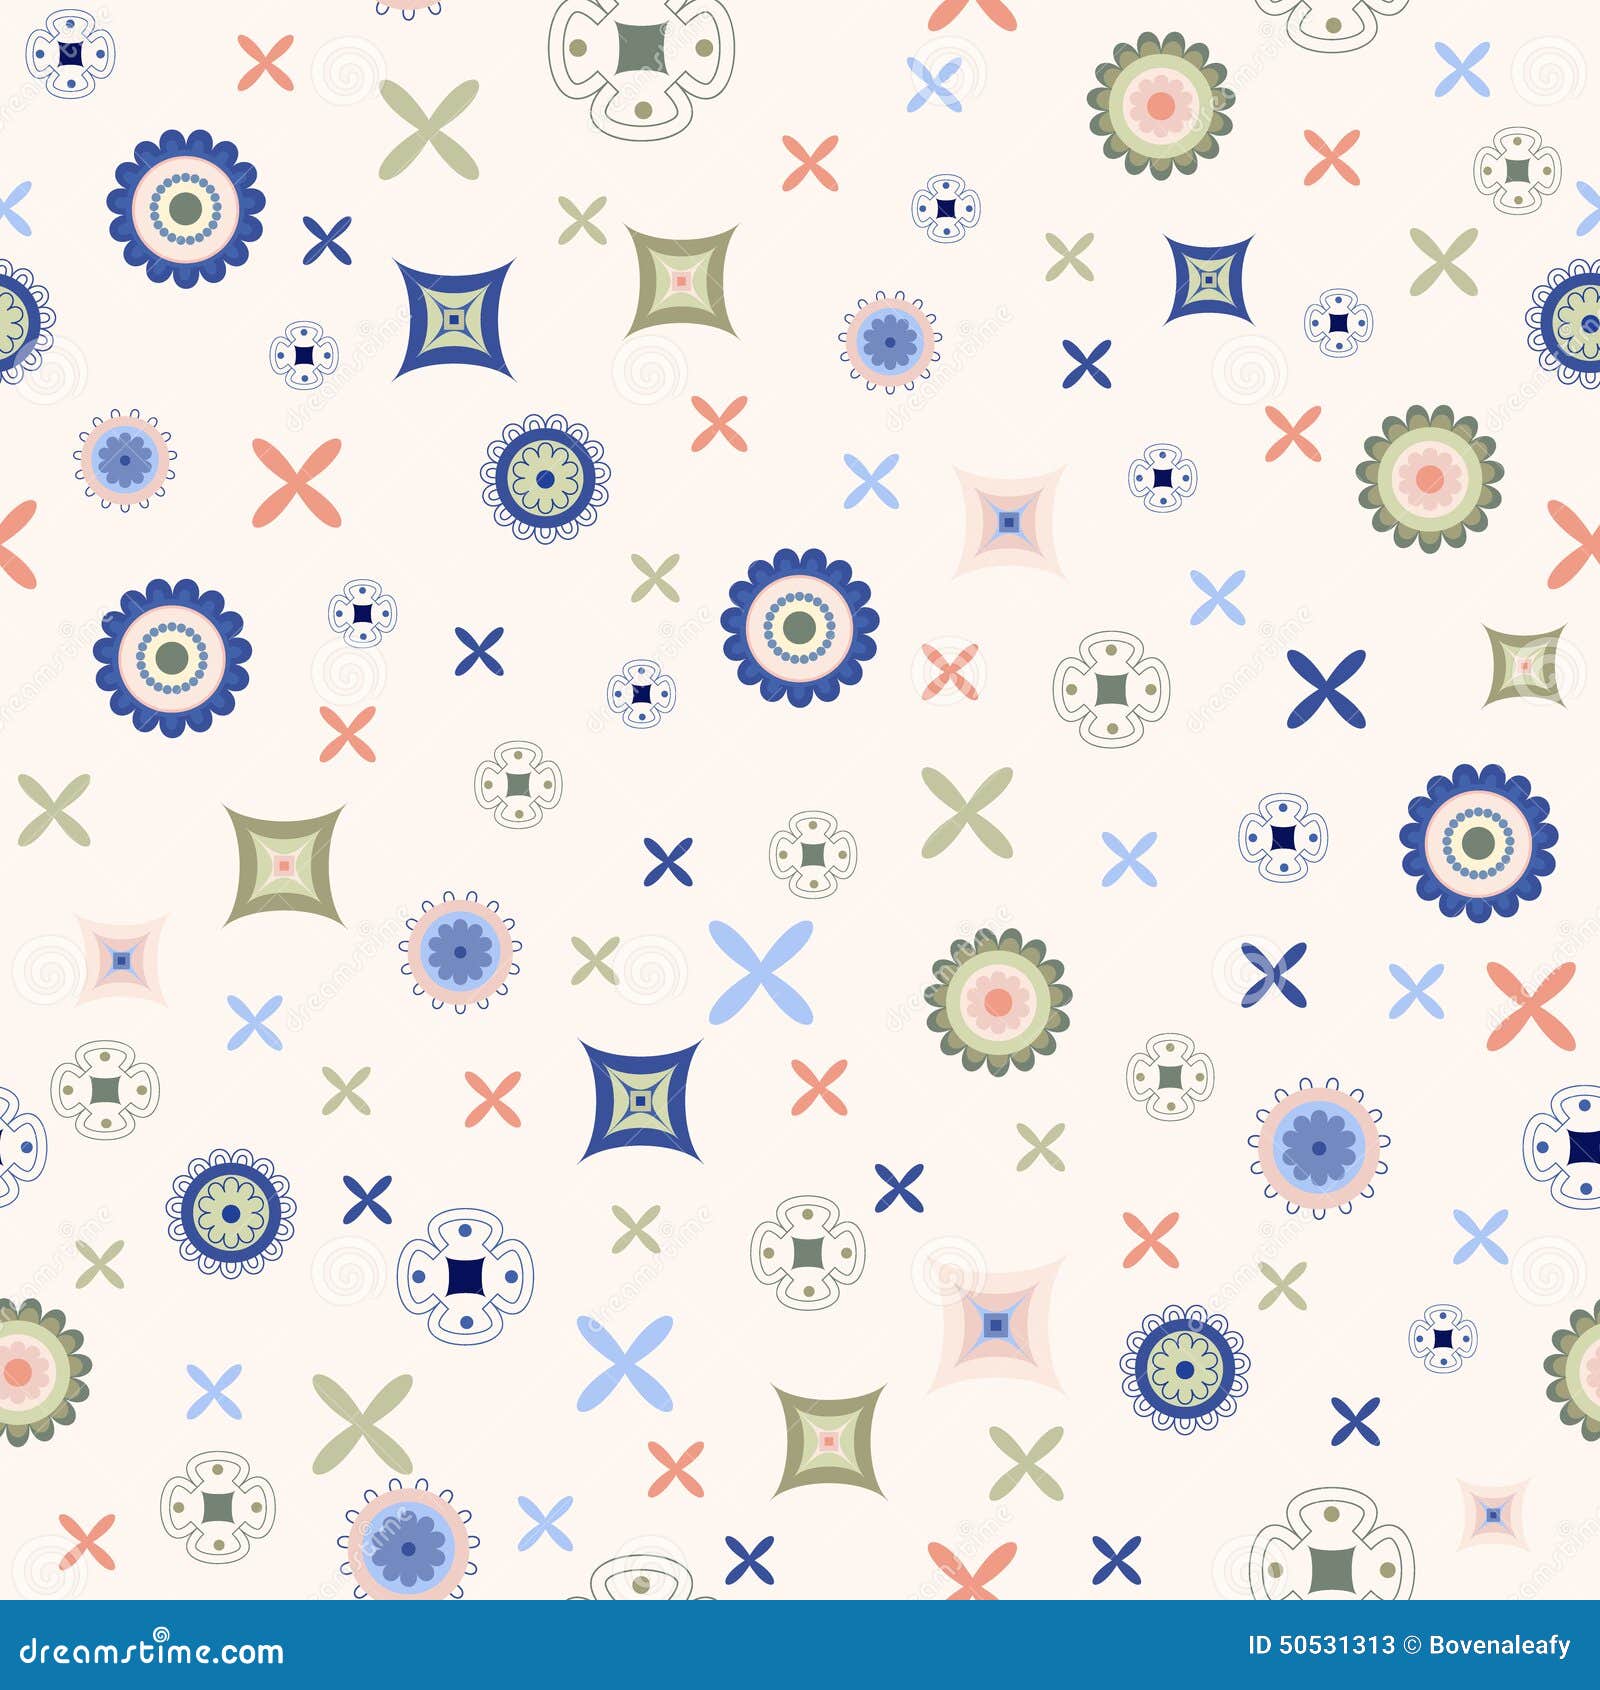 Abstract geometric pattern. Abstract geometric seamless pattern with flowers and rhombus